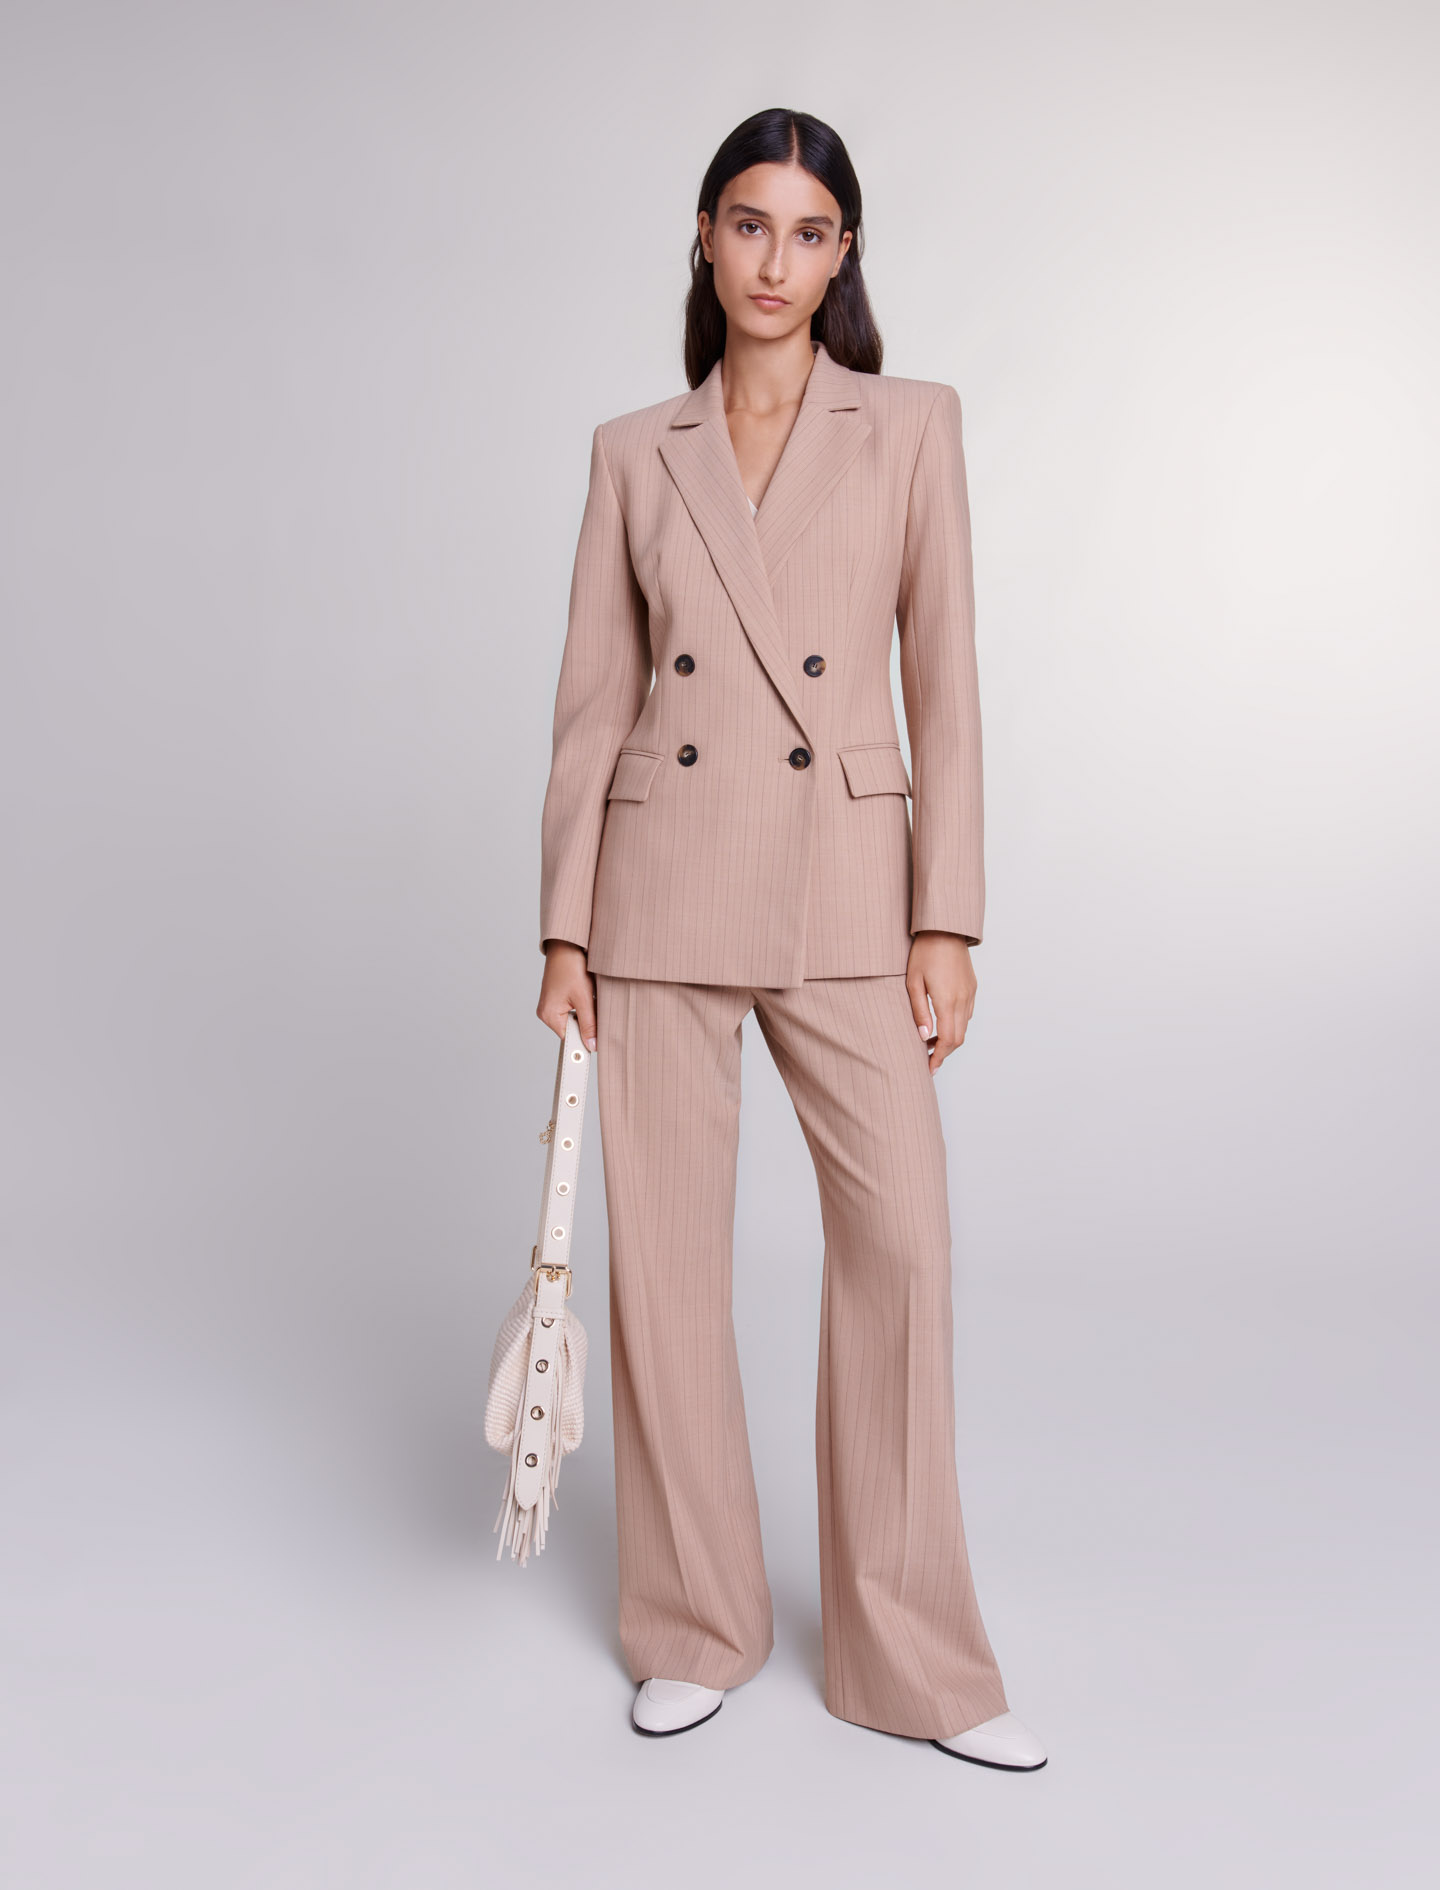 Maje Woman's wool, Striped suit jacket for Spring/Summer, in color Beige / Beige